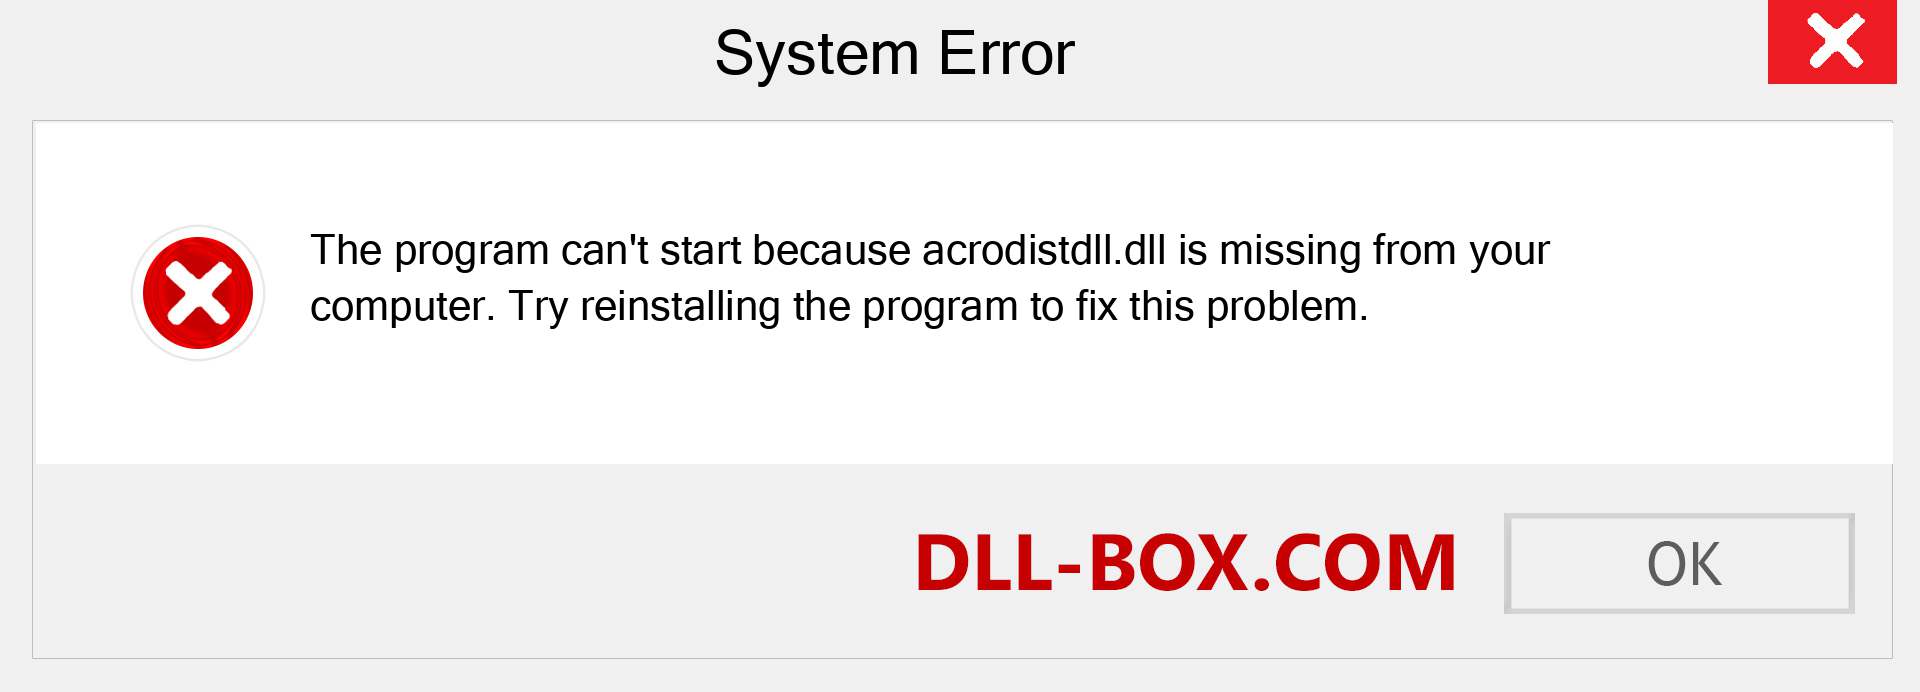  acrodistdll.dll file is missing?. Download for Windows 7, 8, 10 - Fix  acrodistdll dll Missing Error on Windows, photos, images